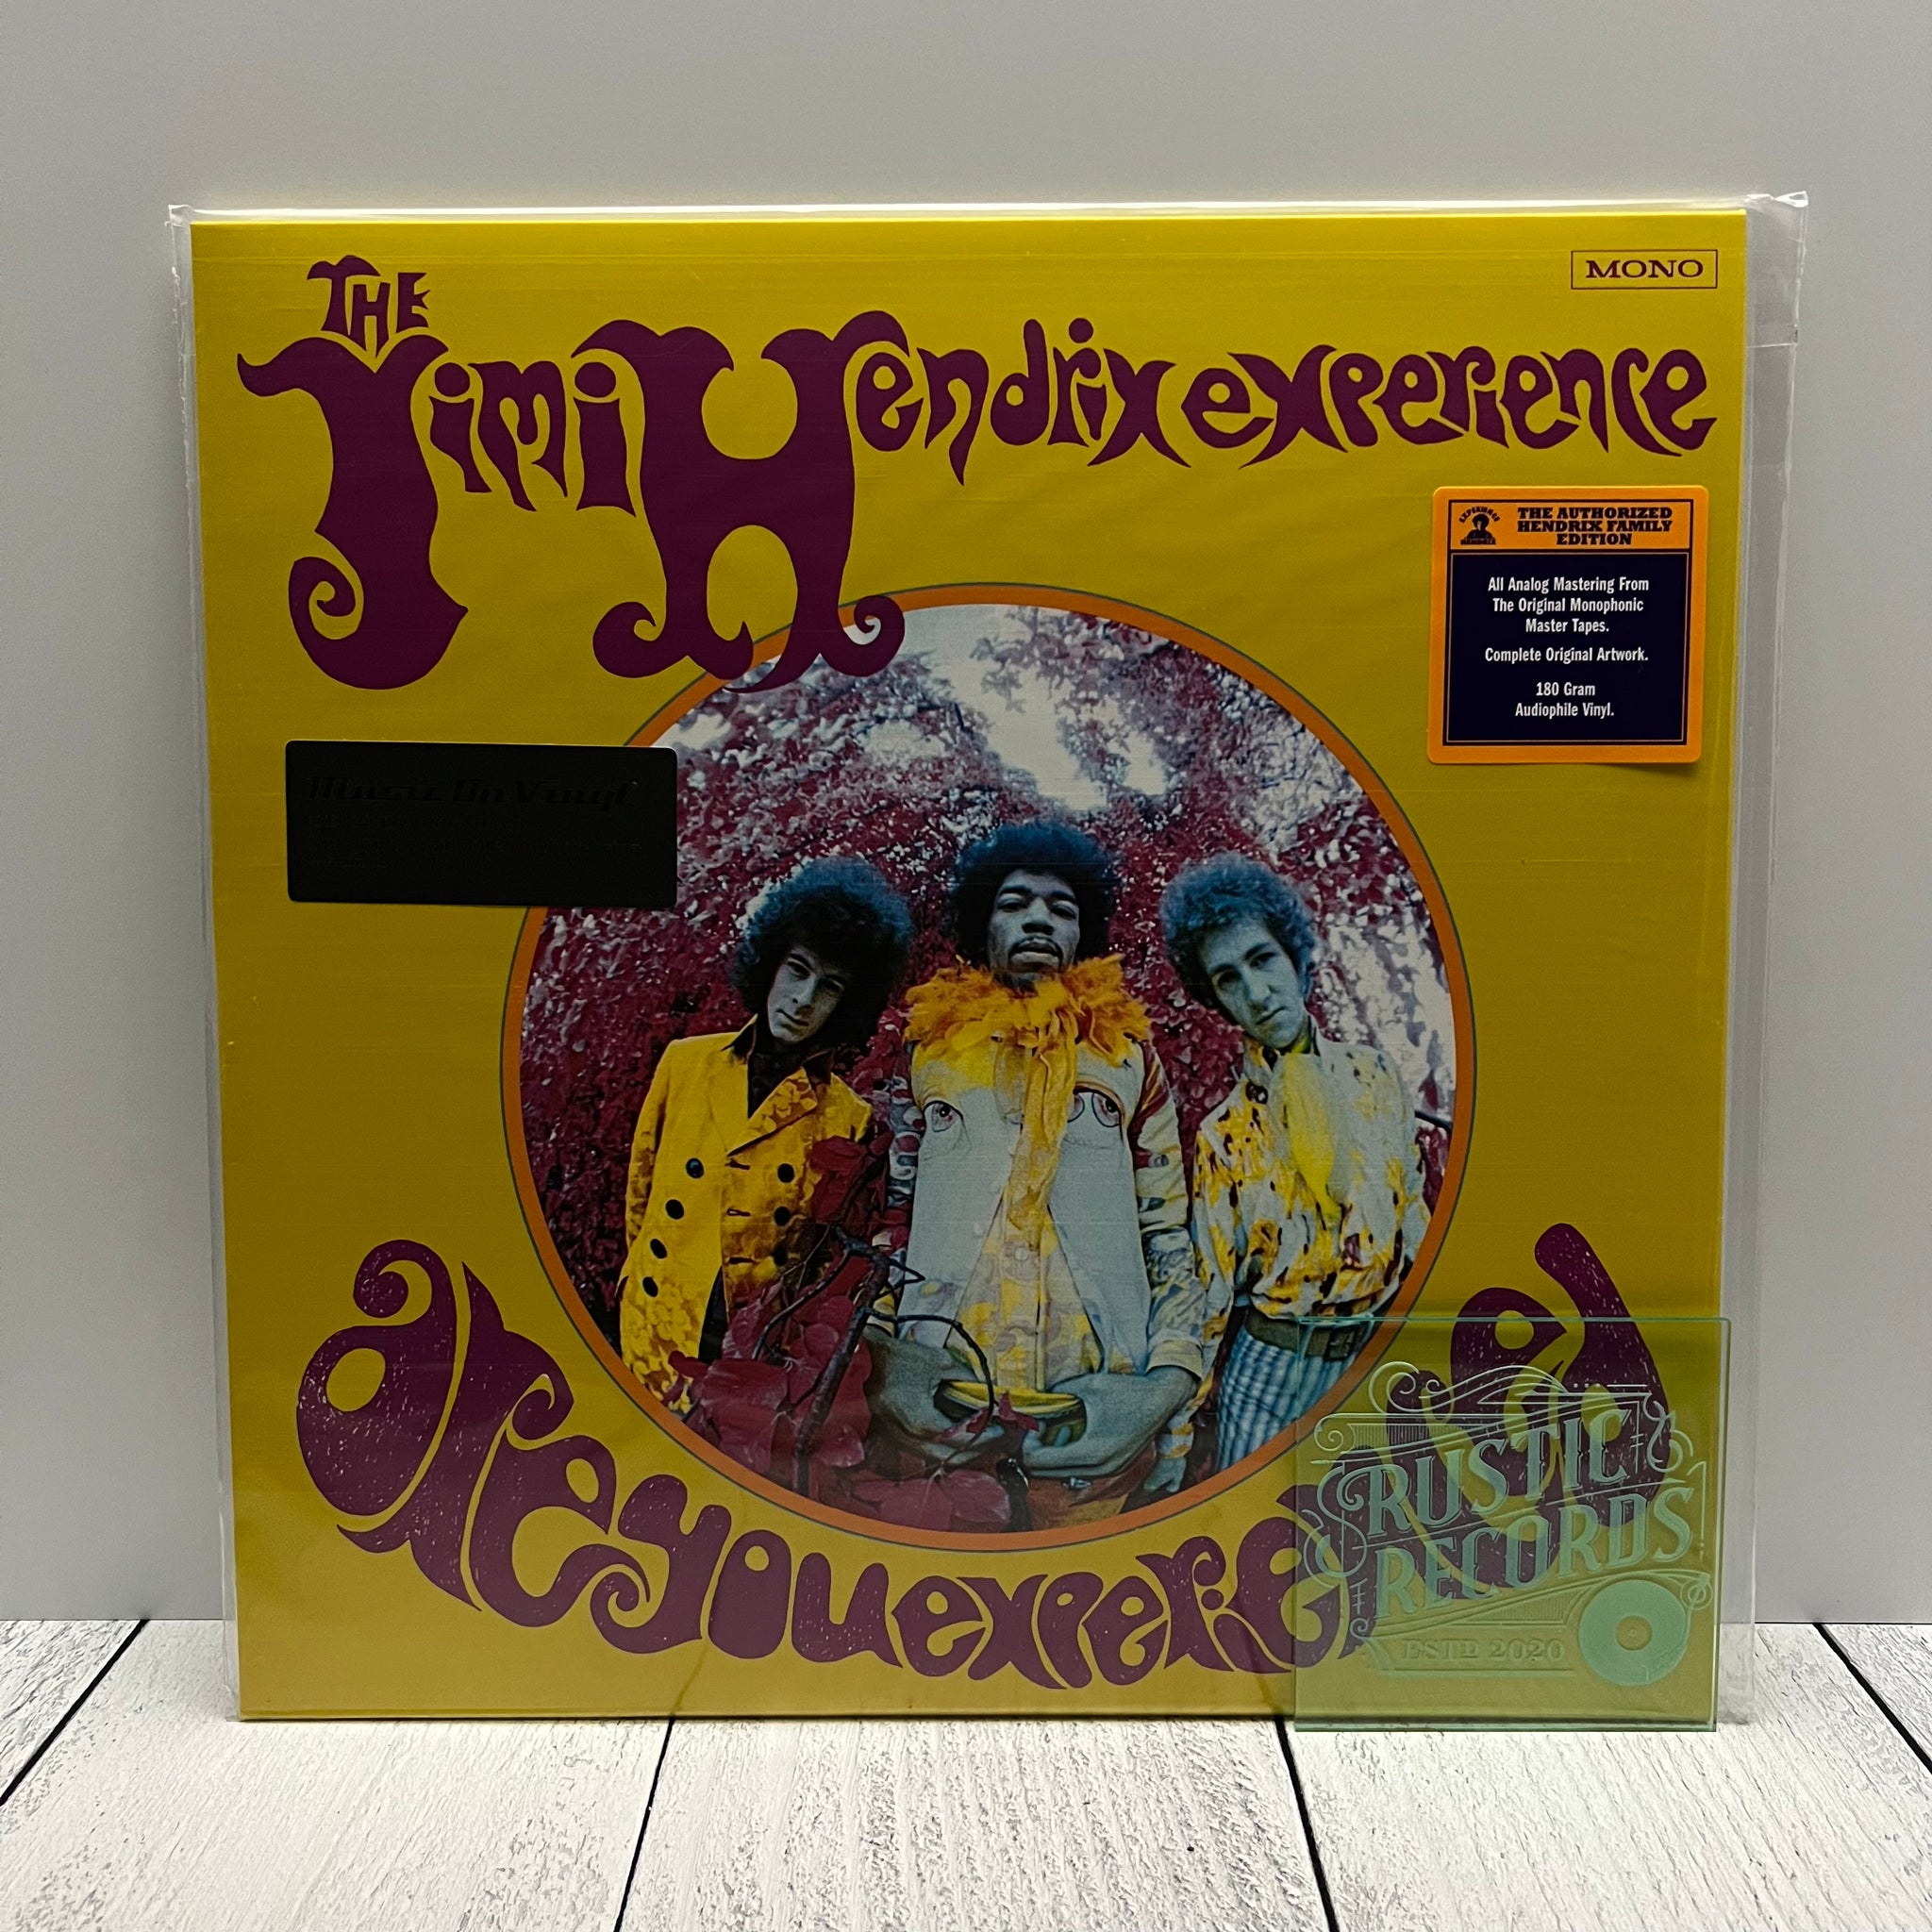 The Jimi Hendrix Experience - Are You Experienced (Music On Vinyl)